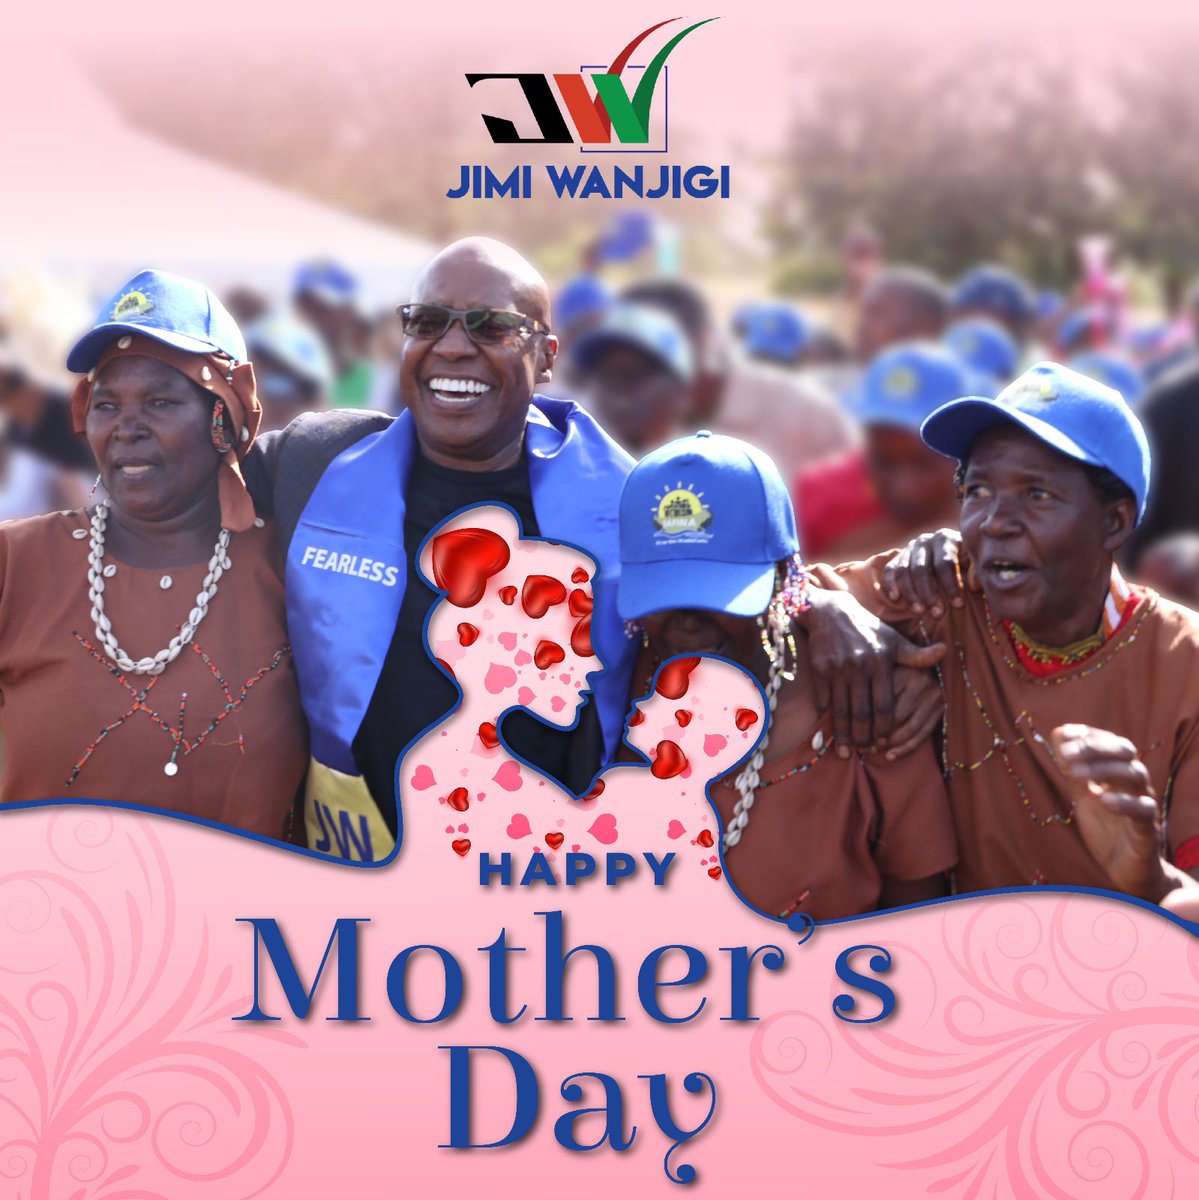 I take this opportunity to acknowledge, honour and celebrate the blessing that every mother is.